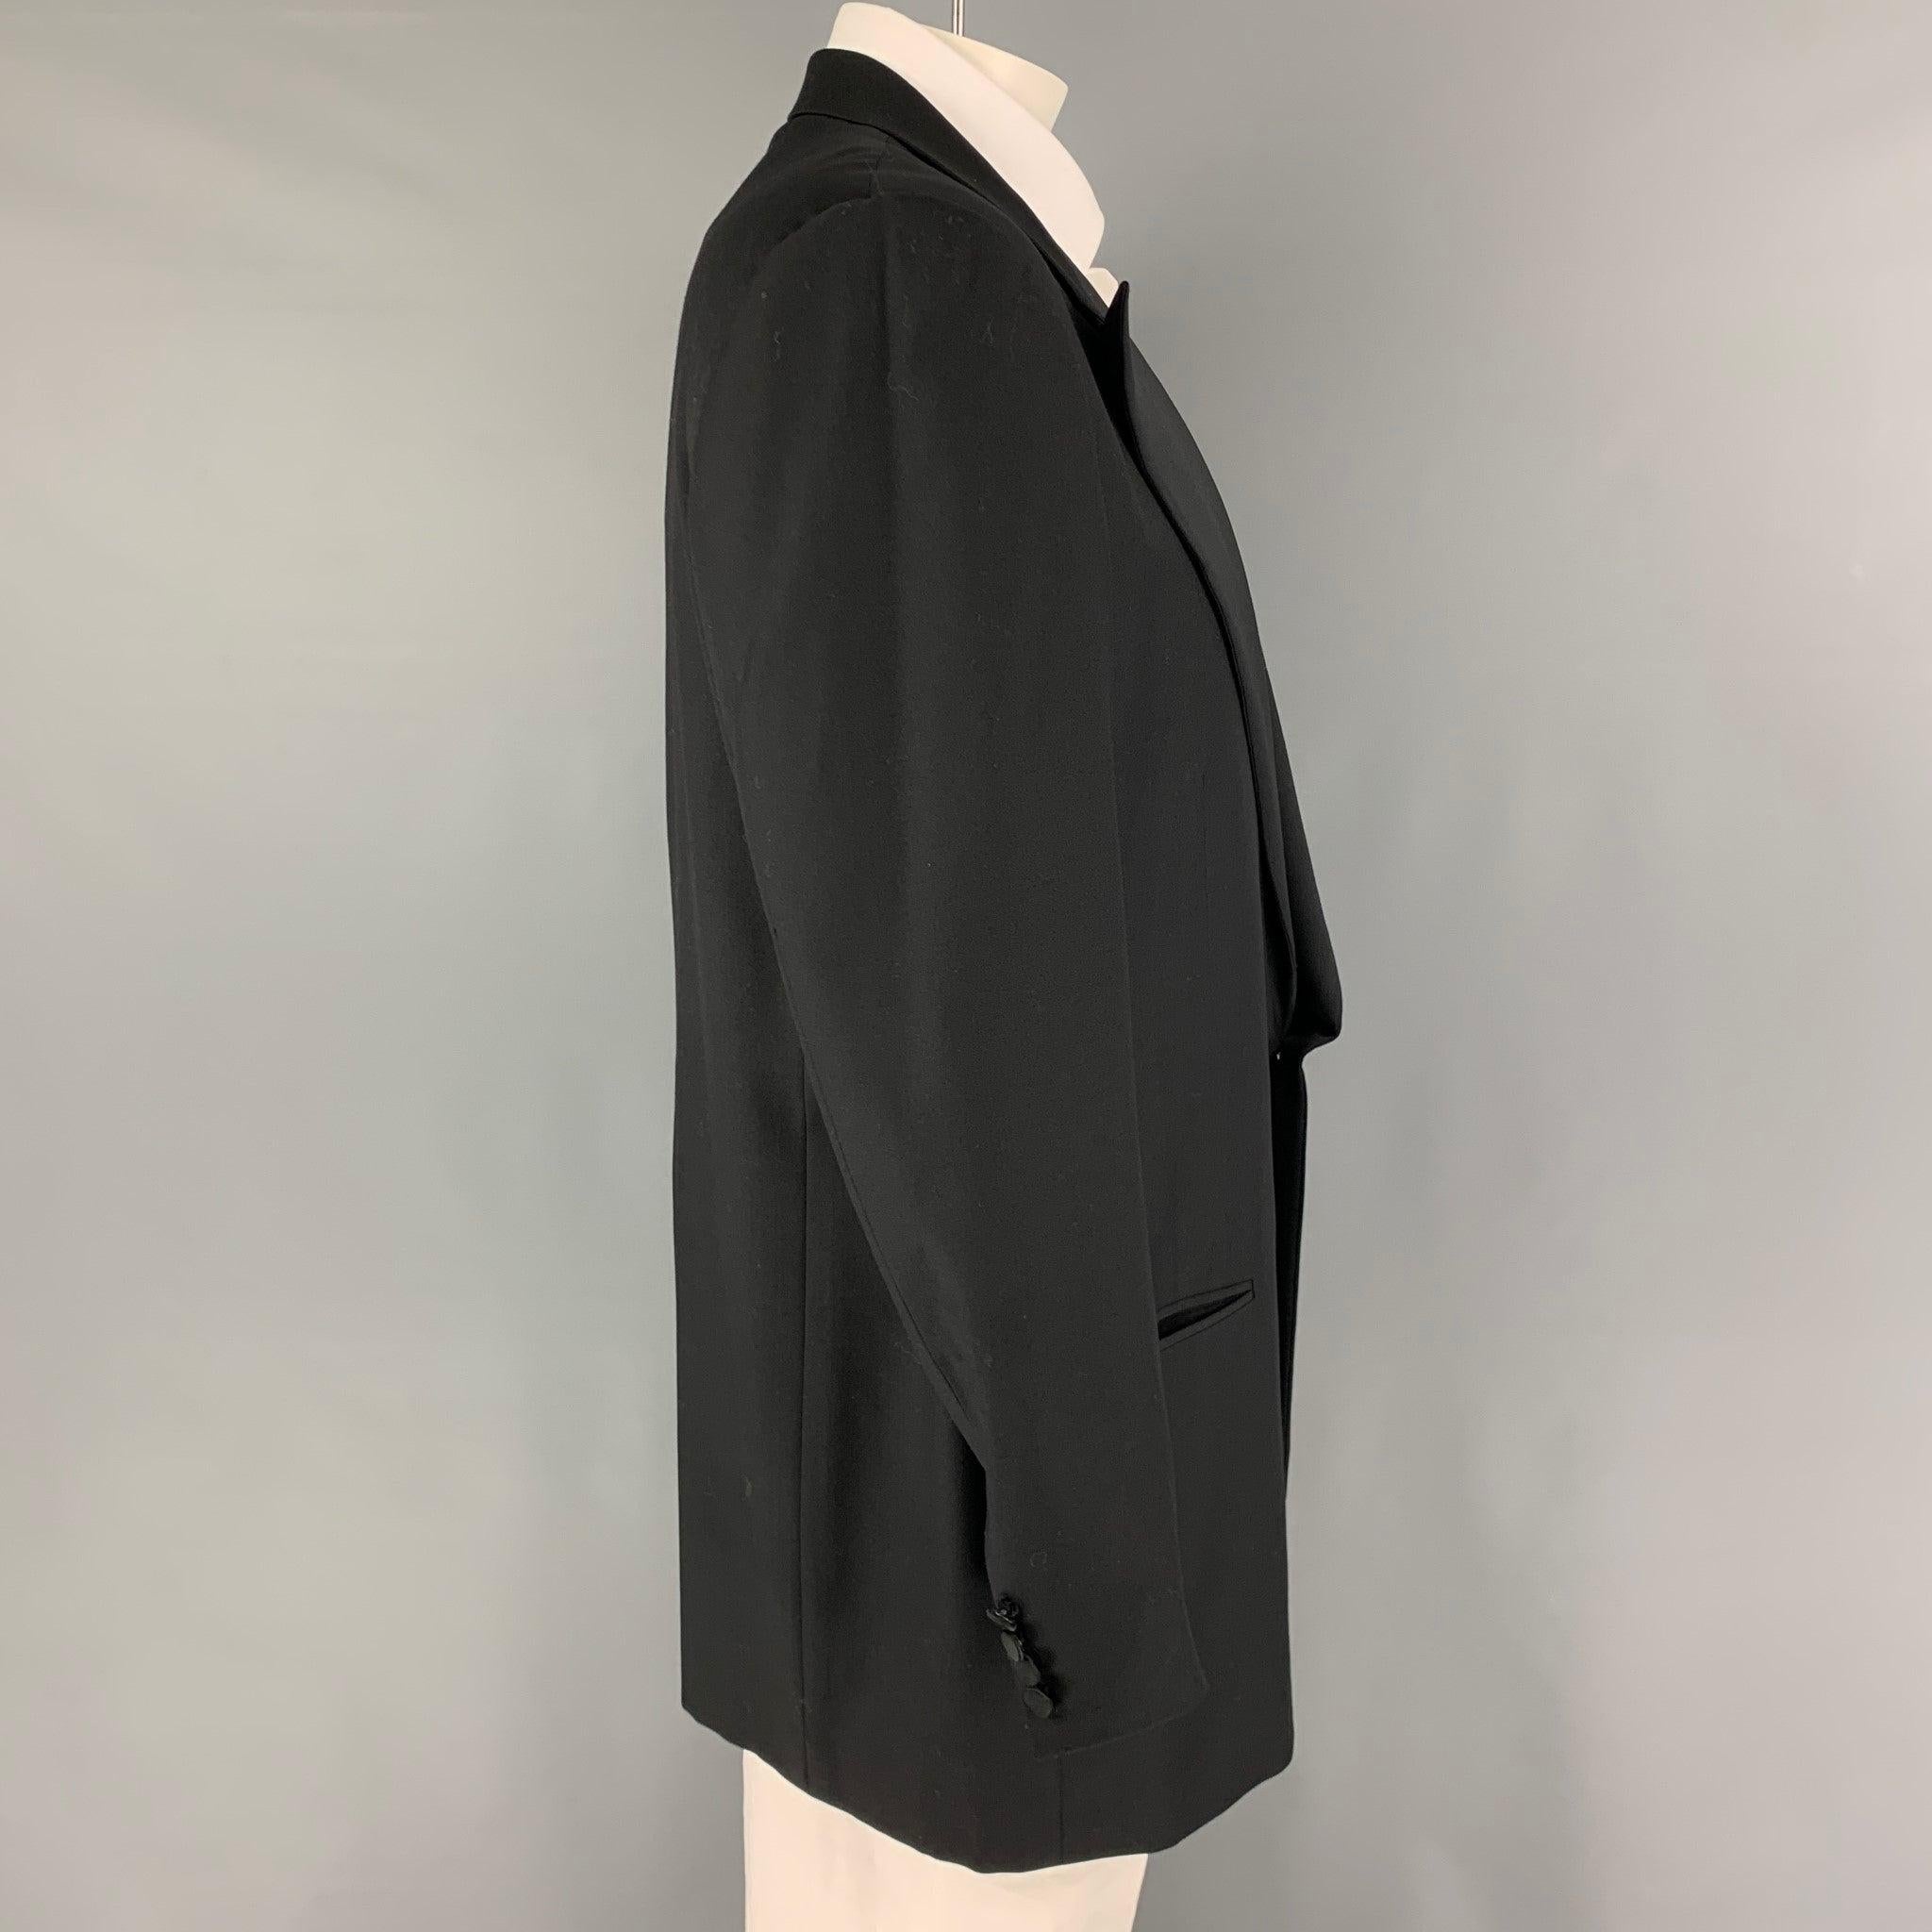 ERMENEGILDO ZEGNA sport coat comes in a black wool with a full liner featuring a peak lapel, slit pockets, and a single button closure.
Excellent
Pre-Owned Condition. 

Marked:   56 

Measurements: 
 
Shoulder: 20 inches Chest: 46 inches Sleeve: